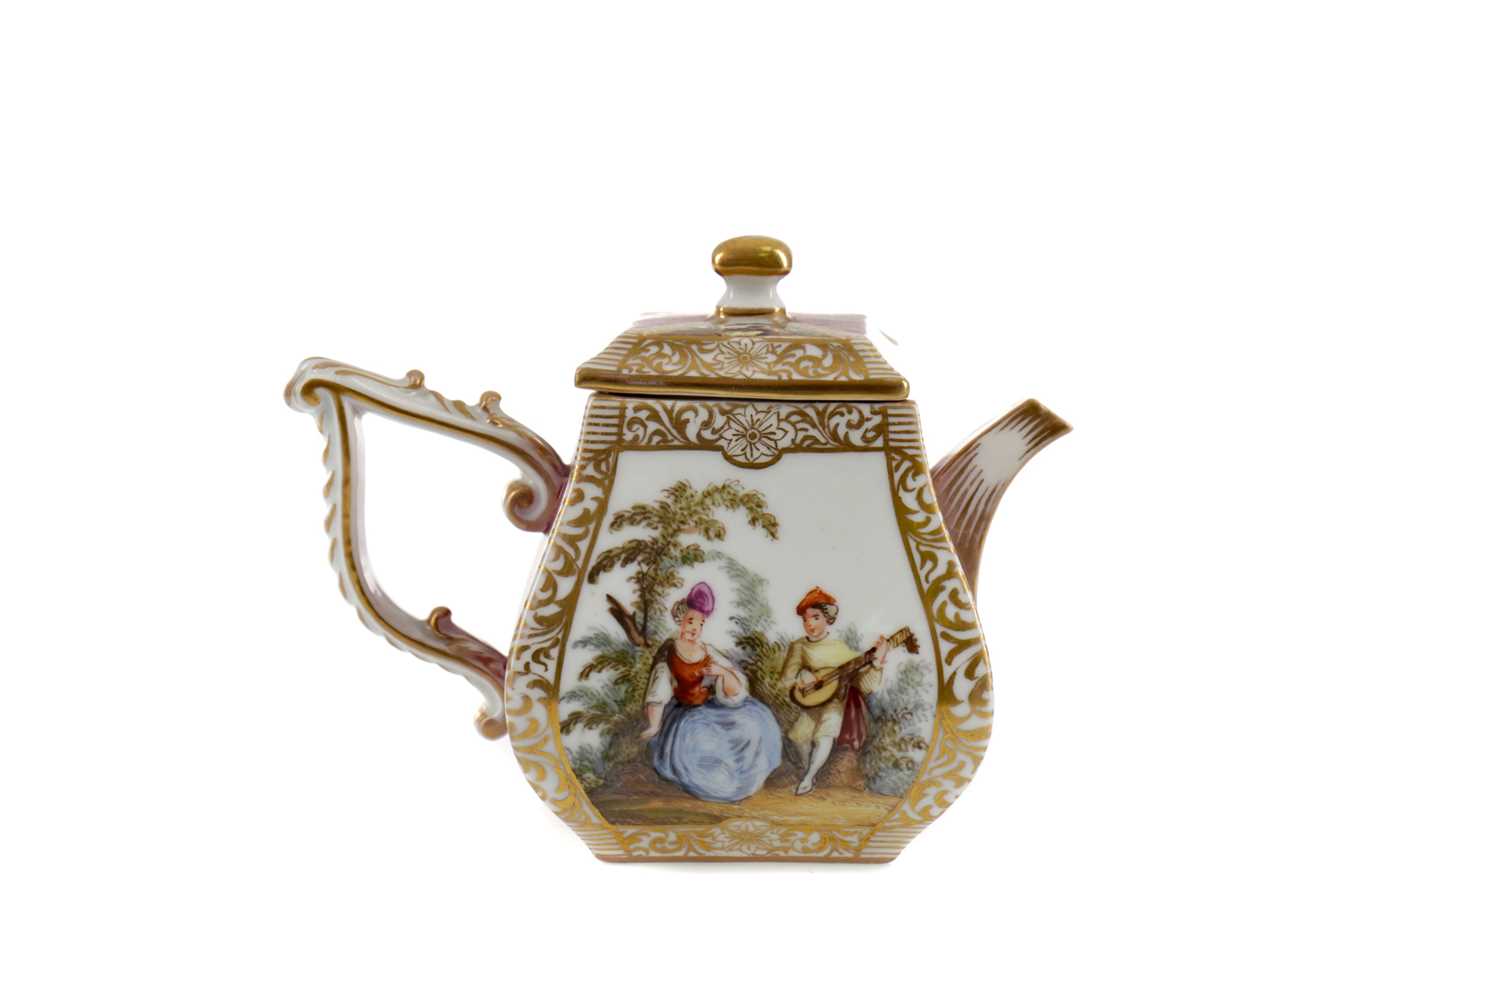 Lot 1098 - A LATE 19TH CENTURY CONTINENTAL PORCELAIN MINIATURE TEAPOT AND COVER